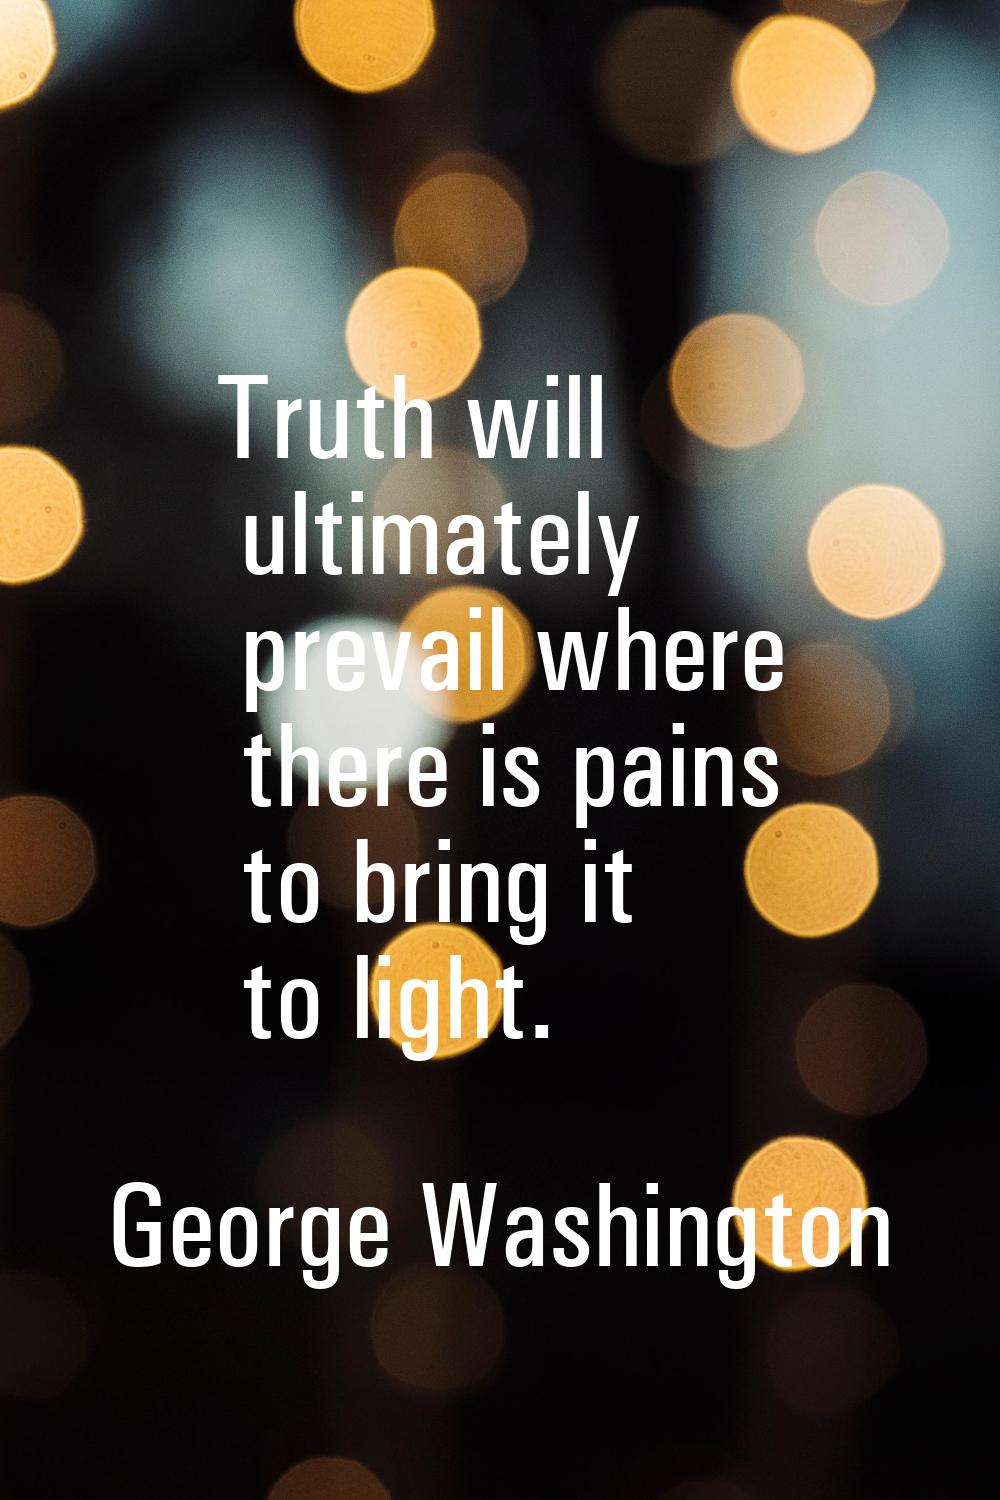 Truth will ultimately prevail where there is pains to bring it to light.